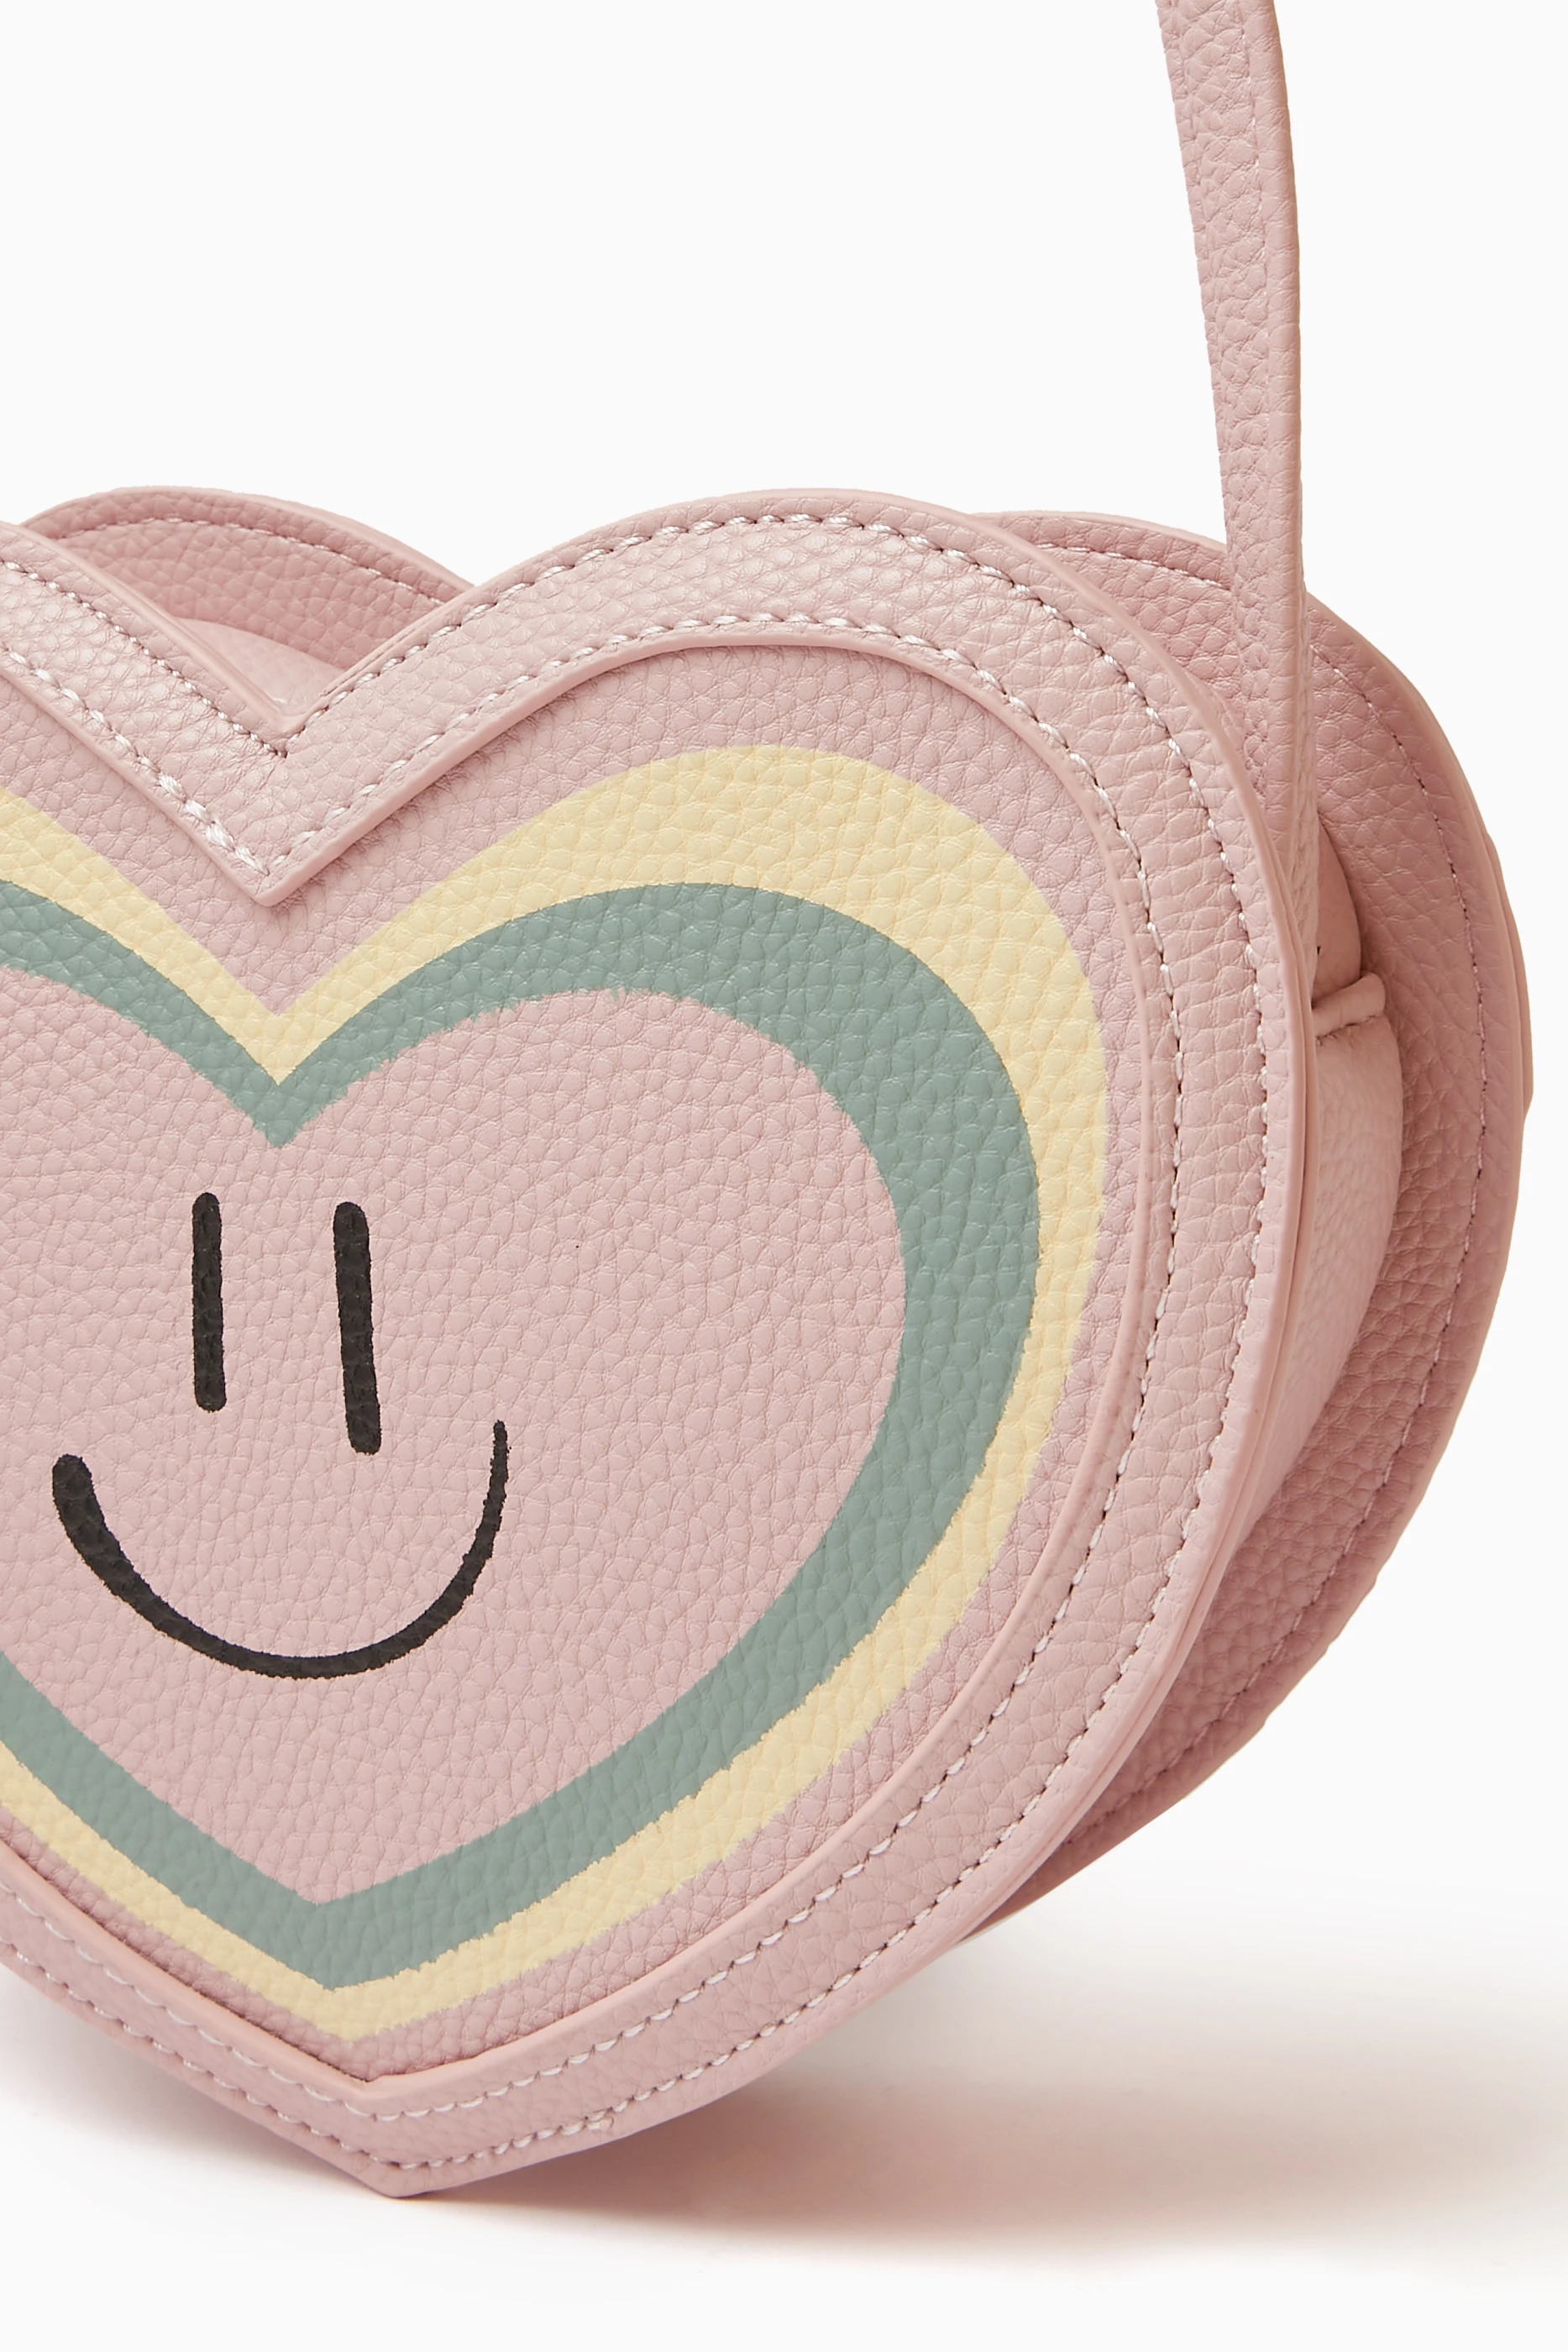 Aura Heart Bag - Petal Blush - Pink heart bag with smiley face on